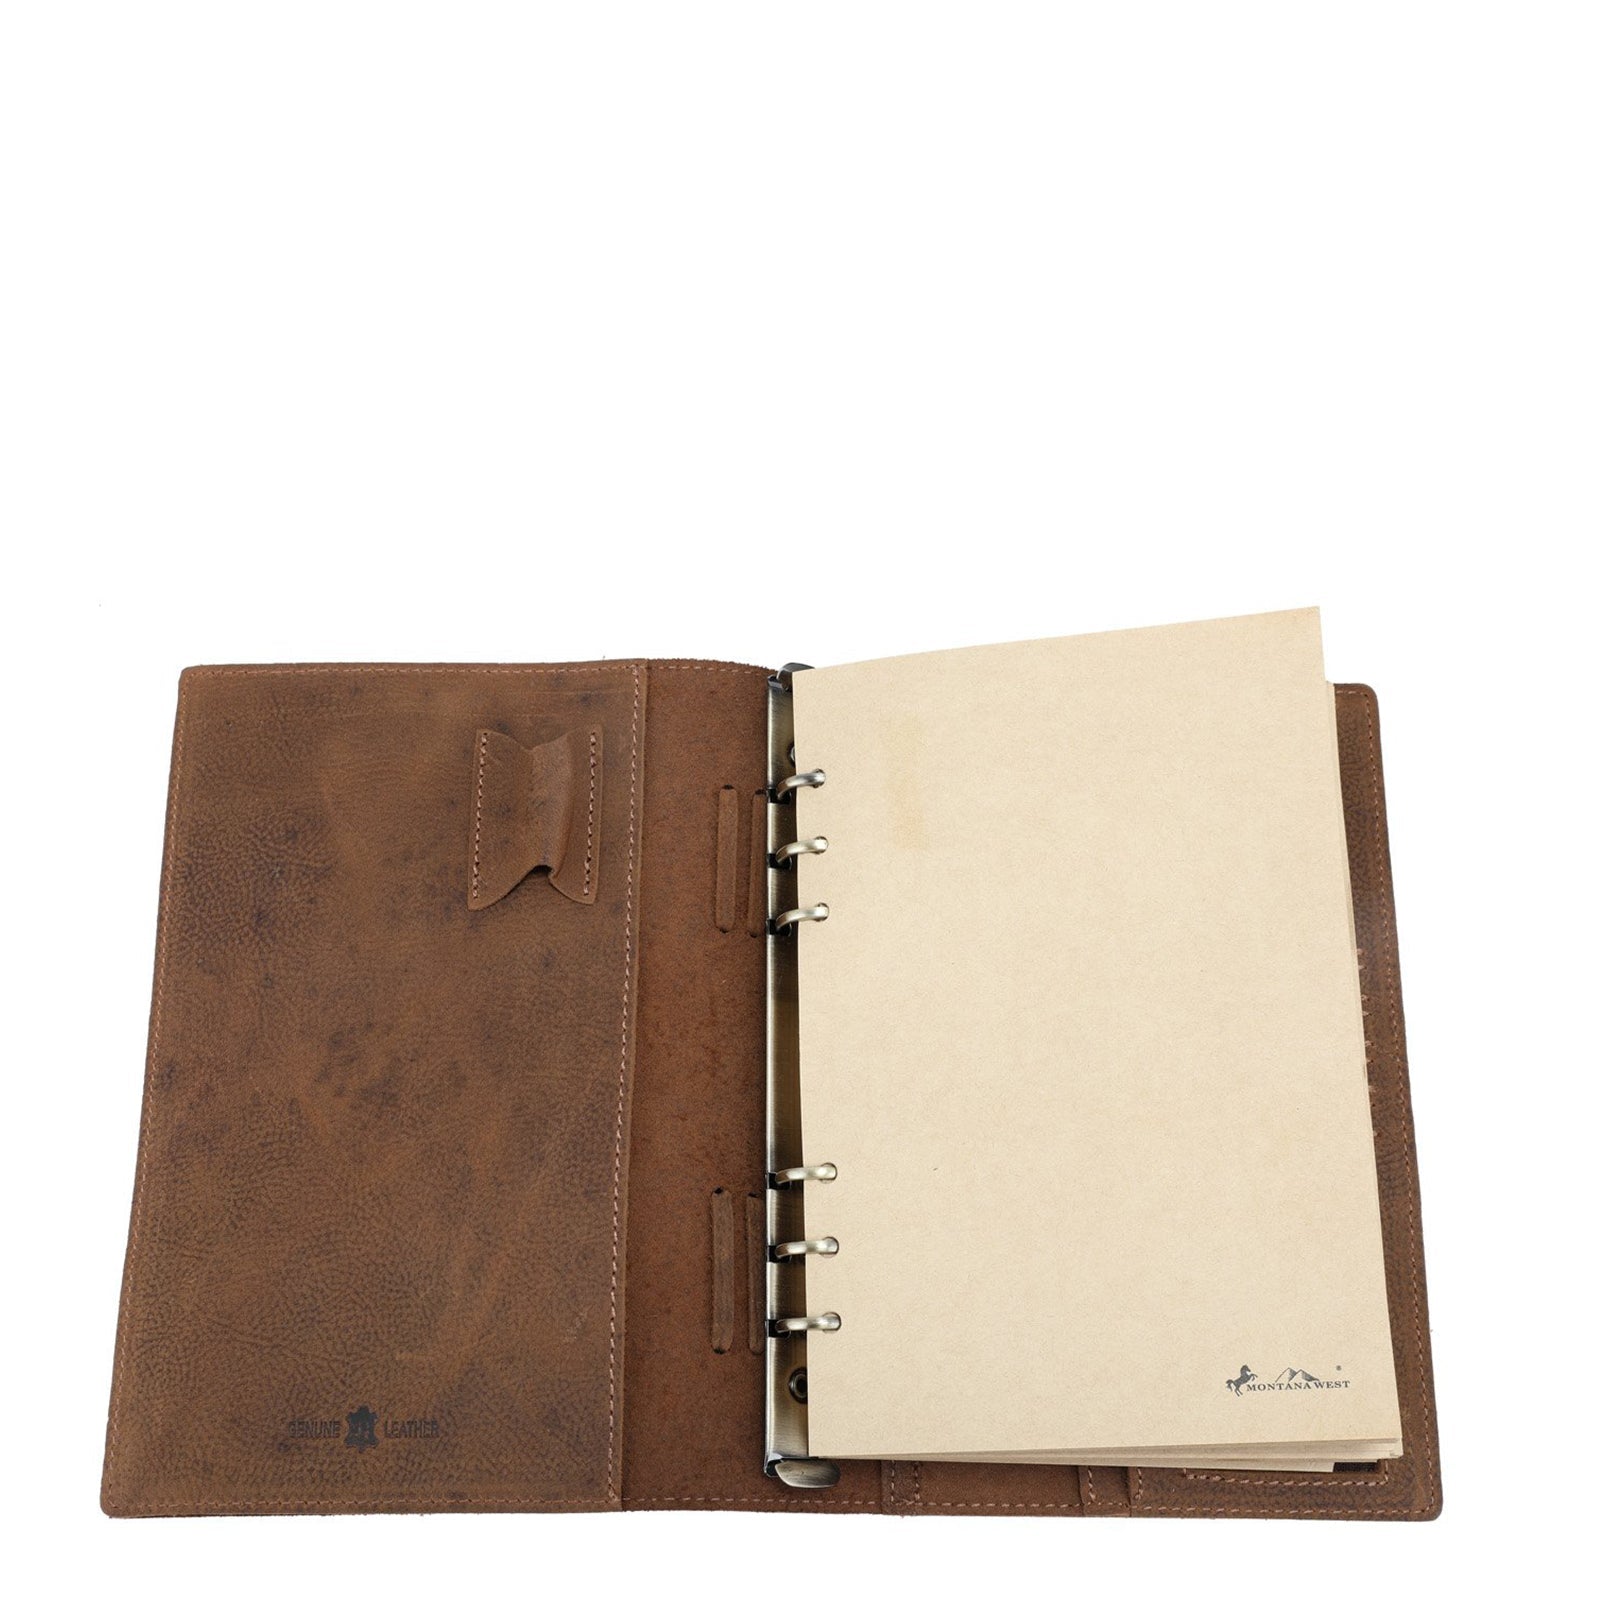 Montana West Western Vintage Genuine Leather Journal Notebook Handheld Size 6.5" x 9.25" (150 Sheets/300 Pages) - Cowgirl Wear